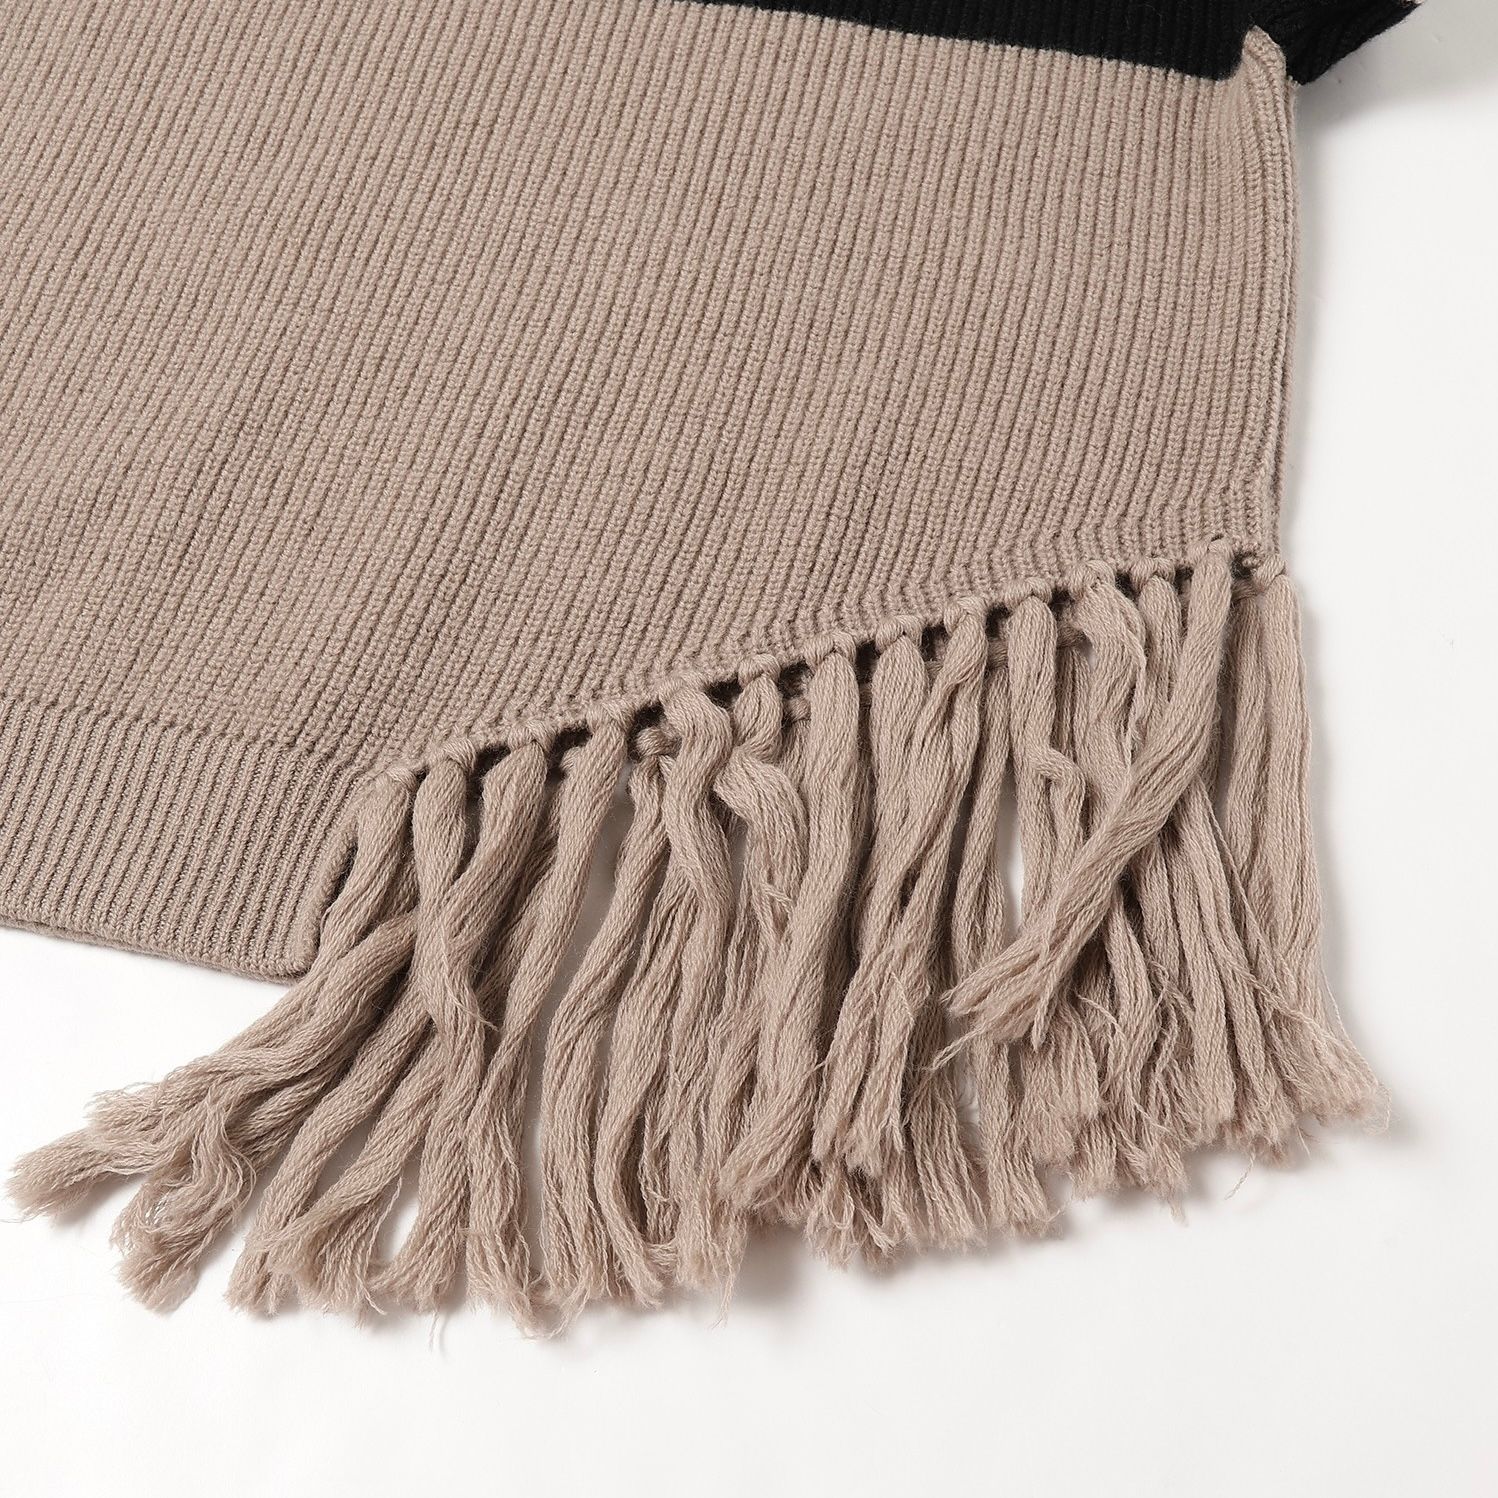 Asymmetric Shawl with Fringe for Women and Men Dark Gray Striped Long Cotton Woven Scarf 